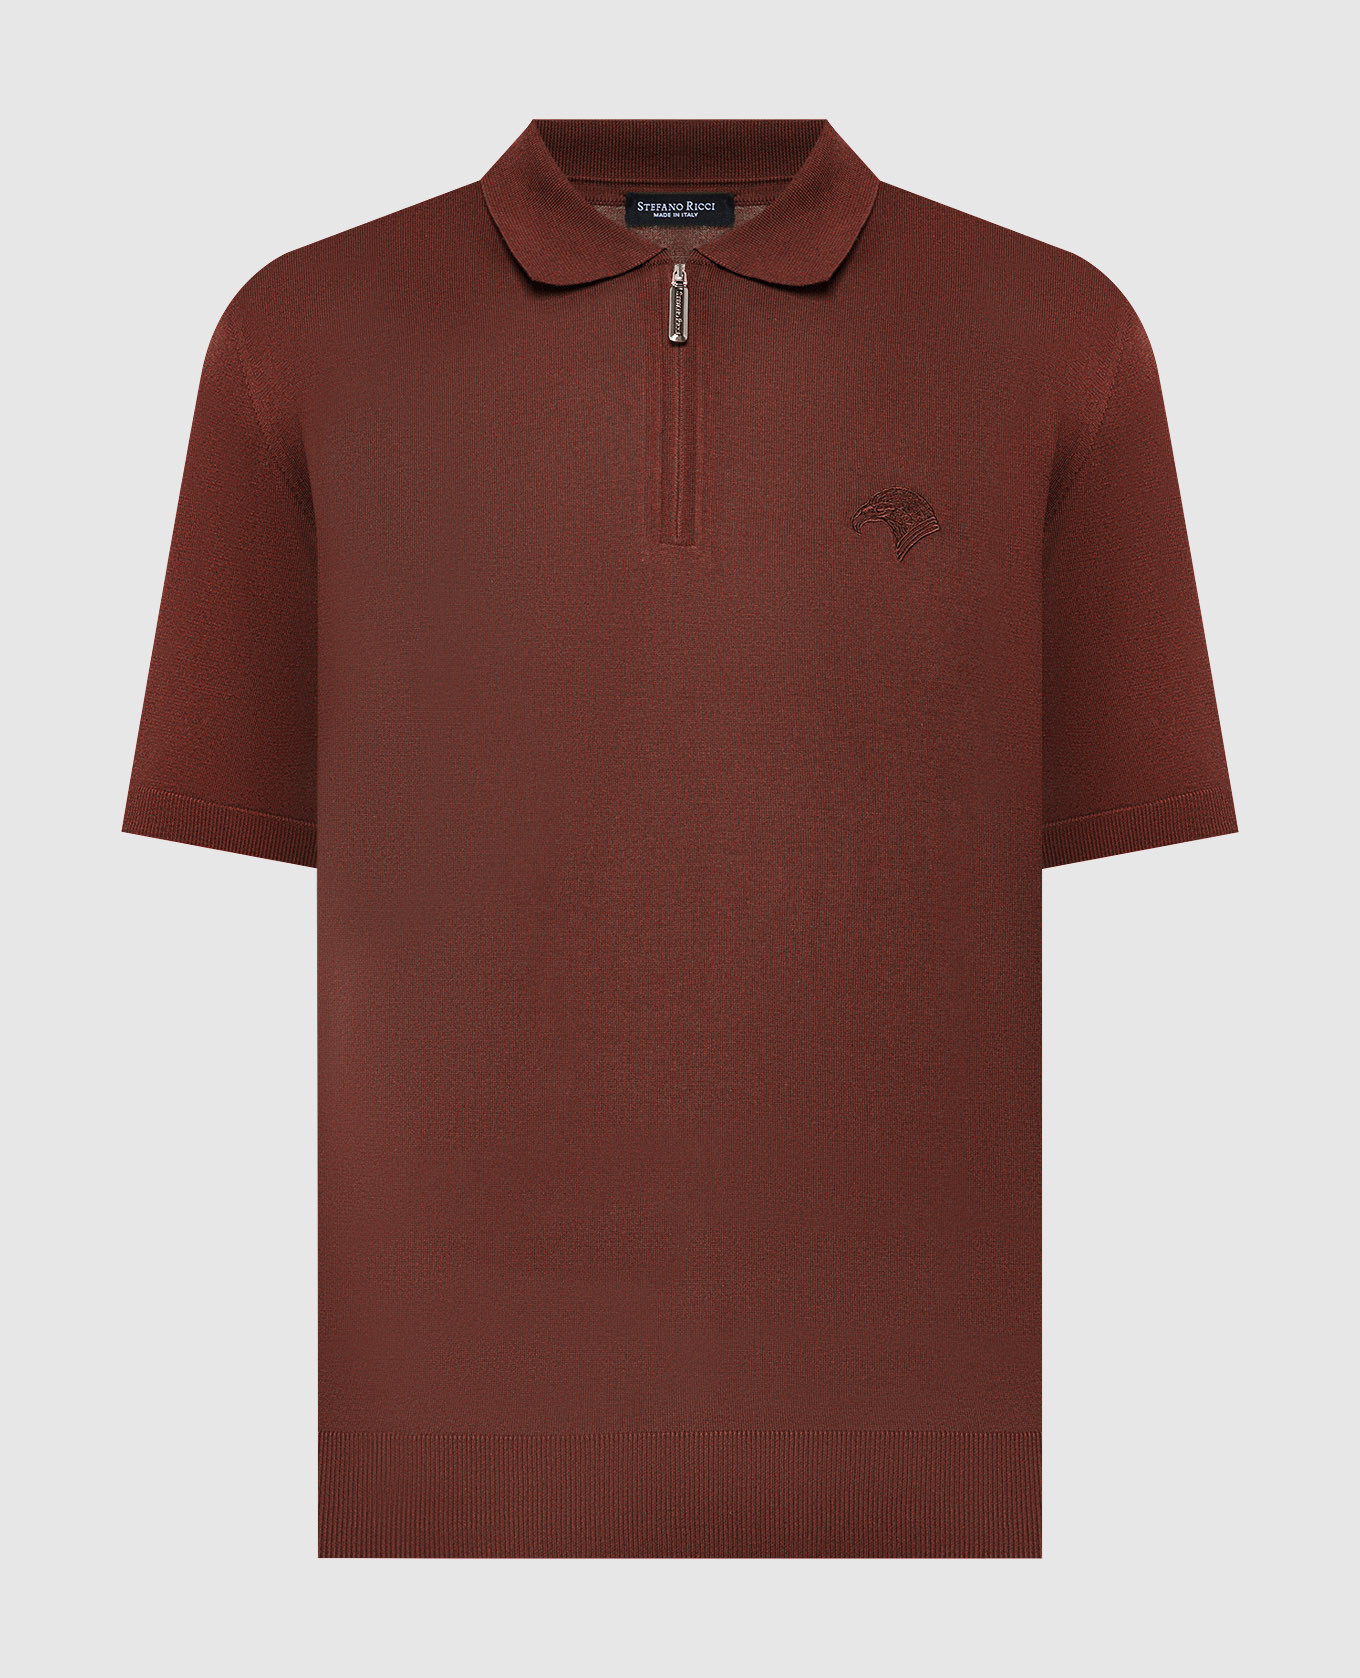 Brown polo shirt with logo emblem embroidery